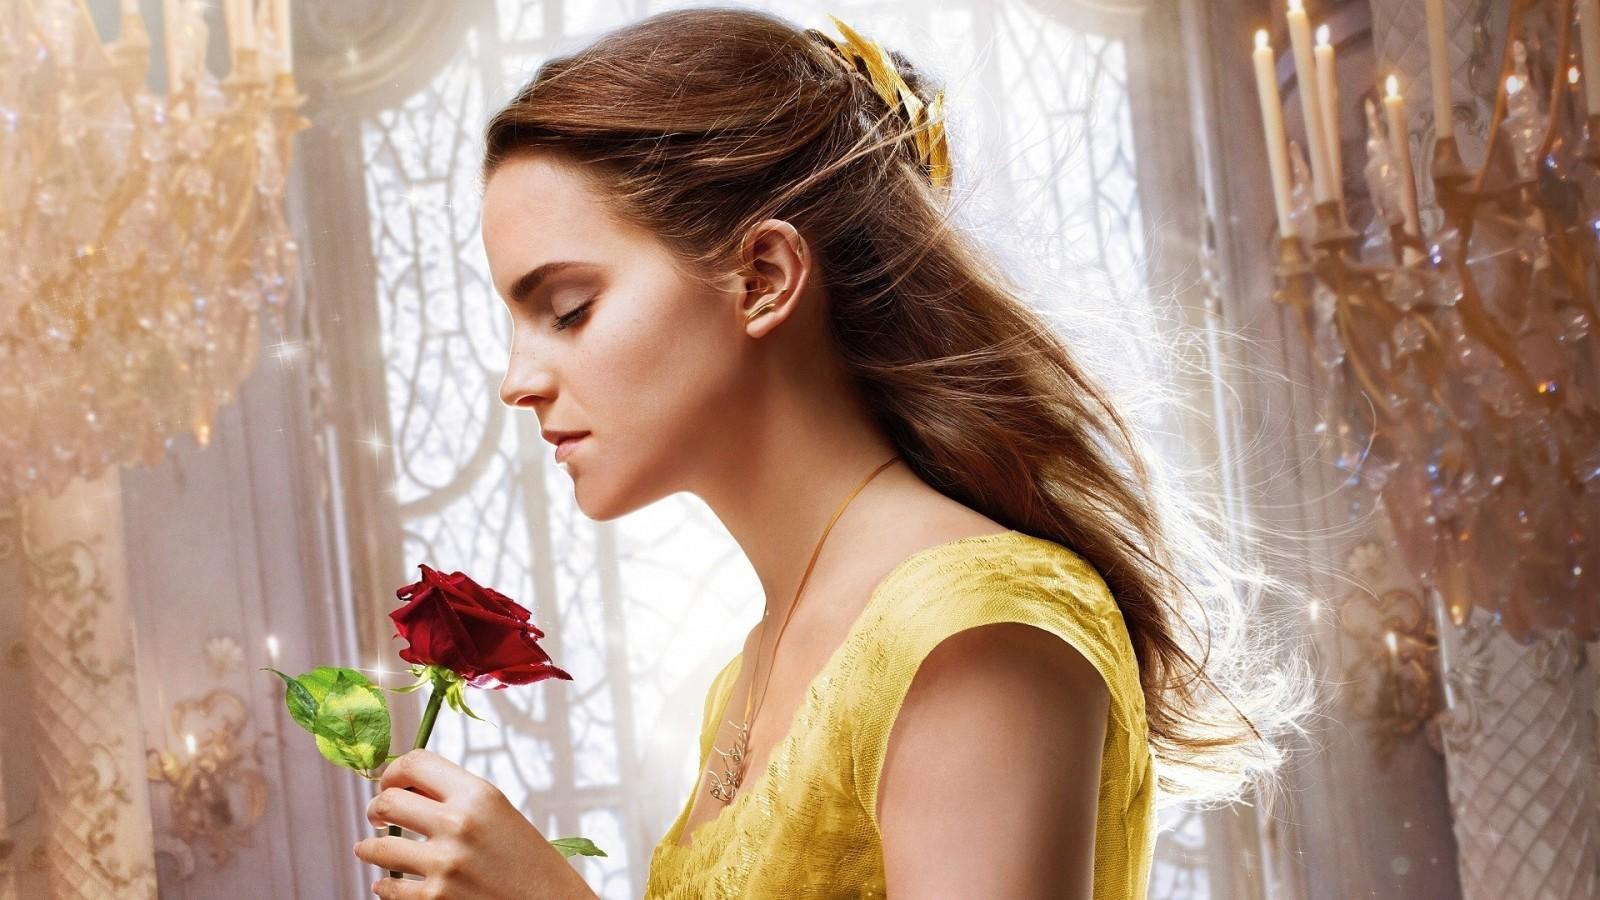 Download 1600x900 Emma Watson, Beauty And The Beast, Rose, Profile